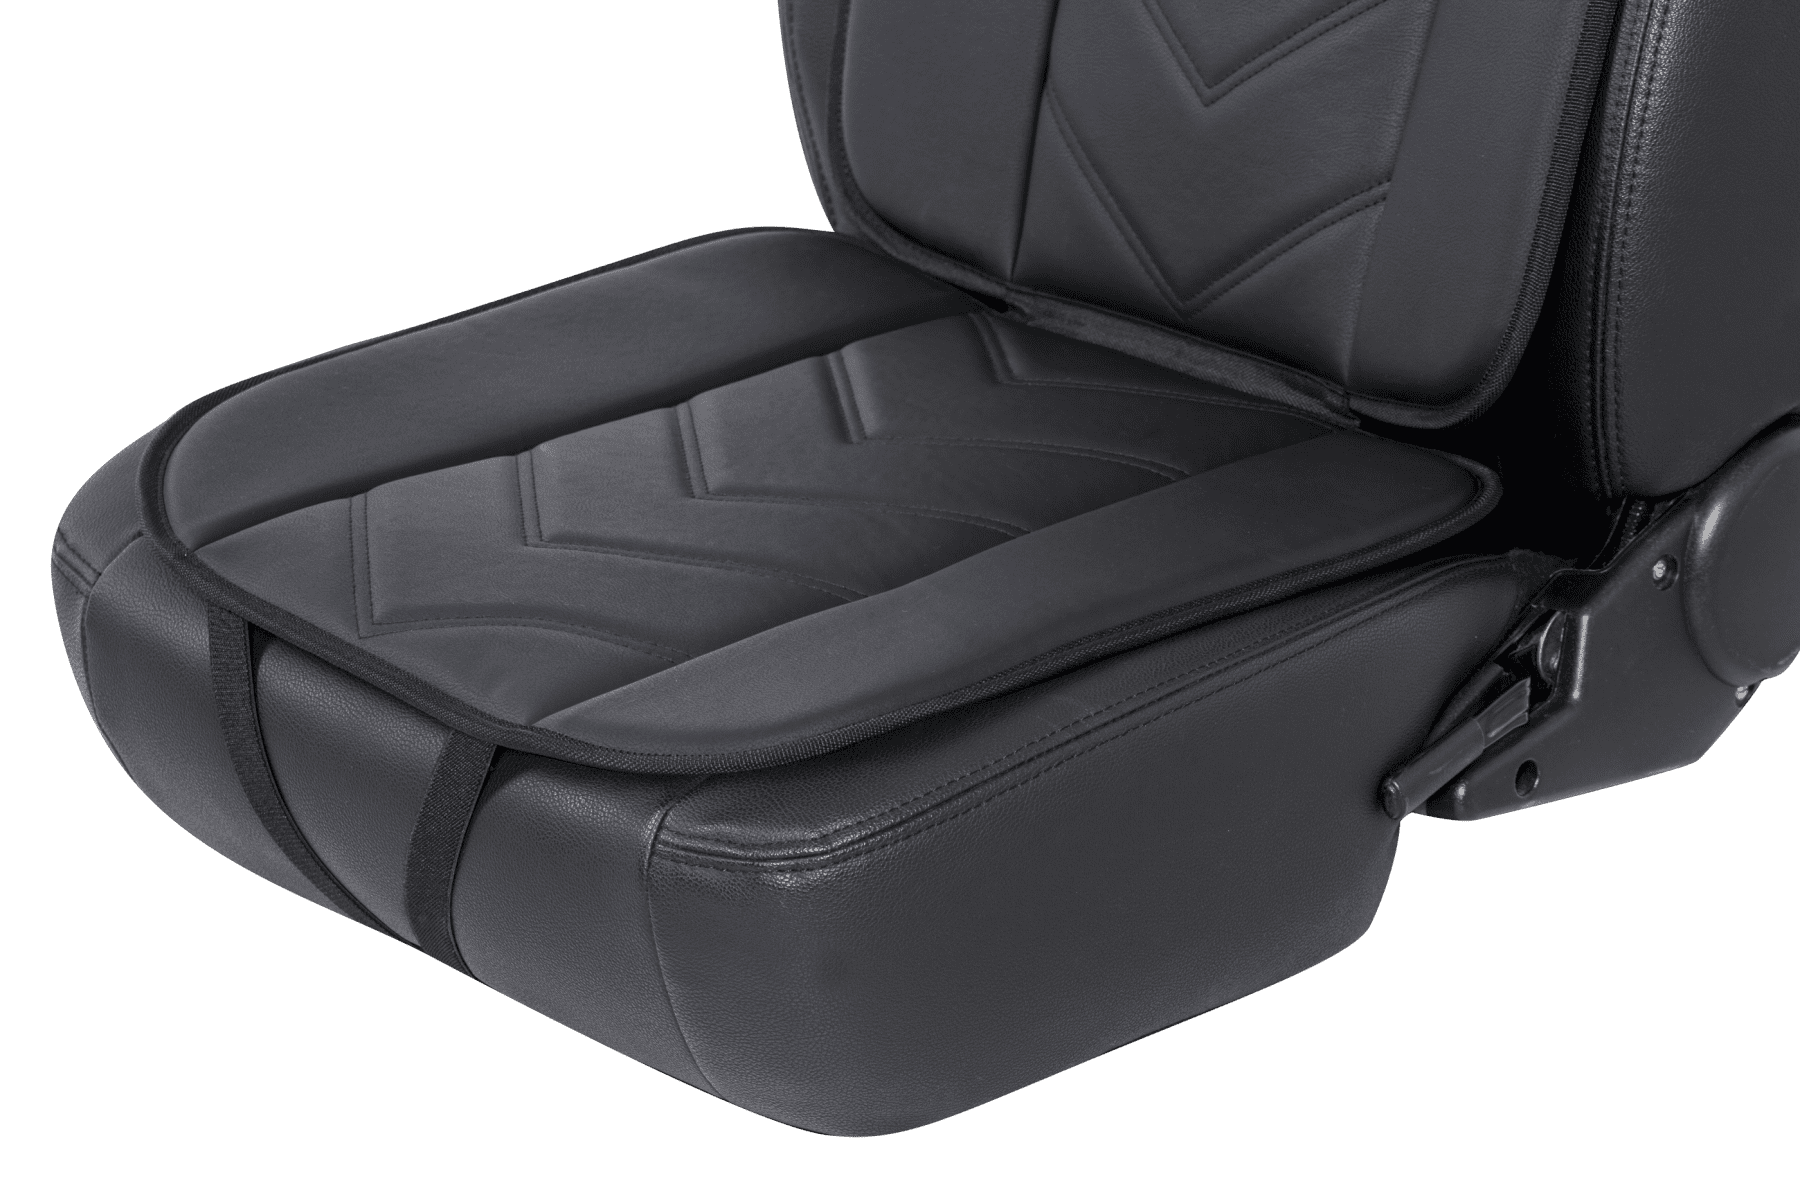 SXSBOX Vehicle Seat Cushions, Driver Seat Cushion for Height, Universal Fit  for Most for Auto SUV Truck, Black